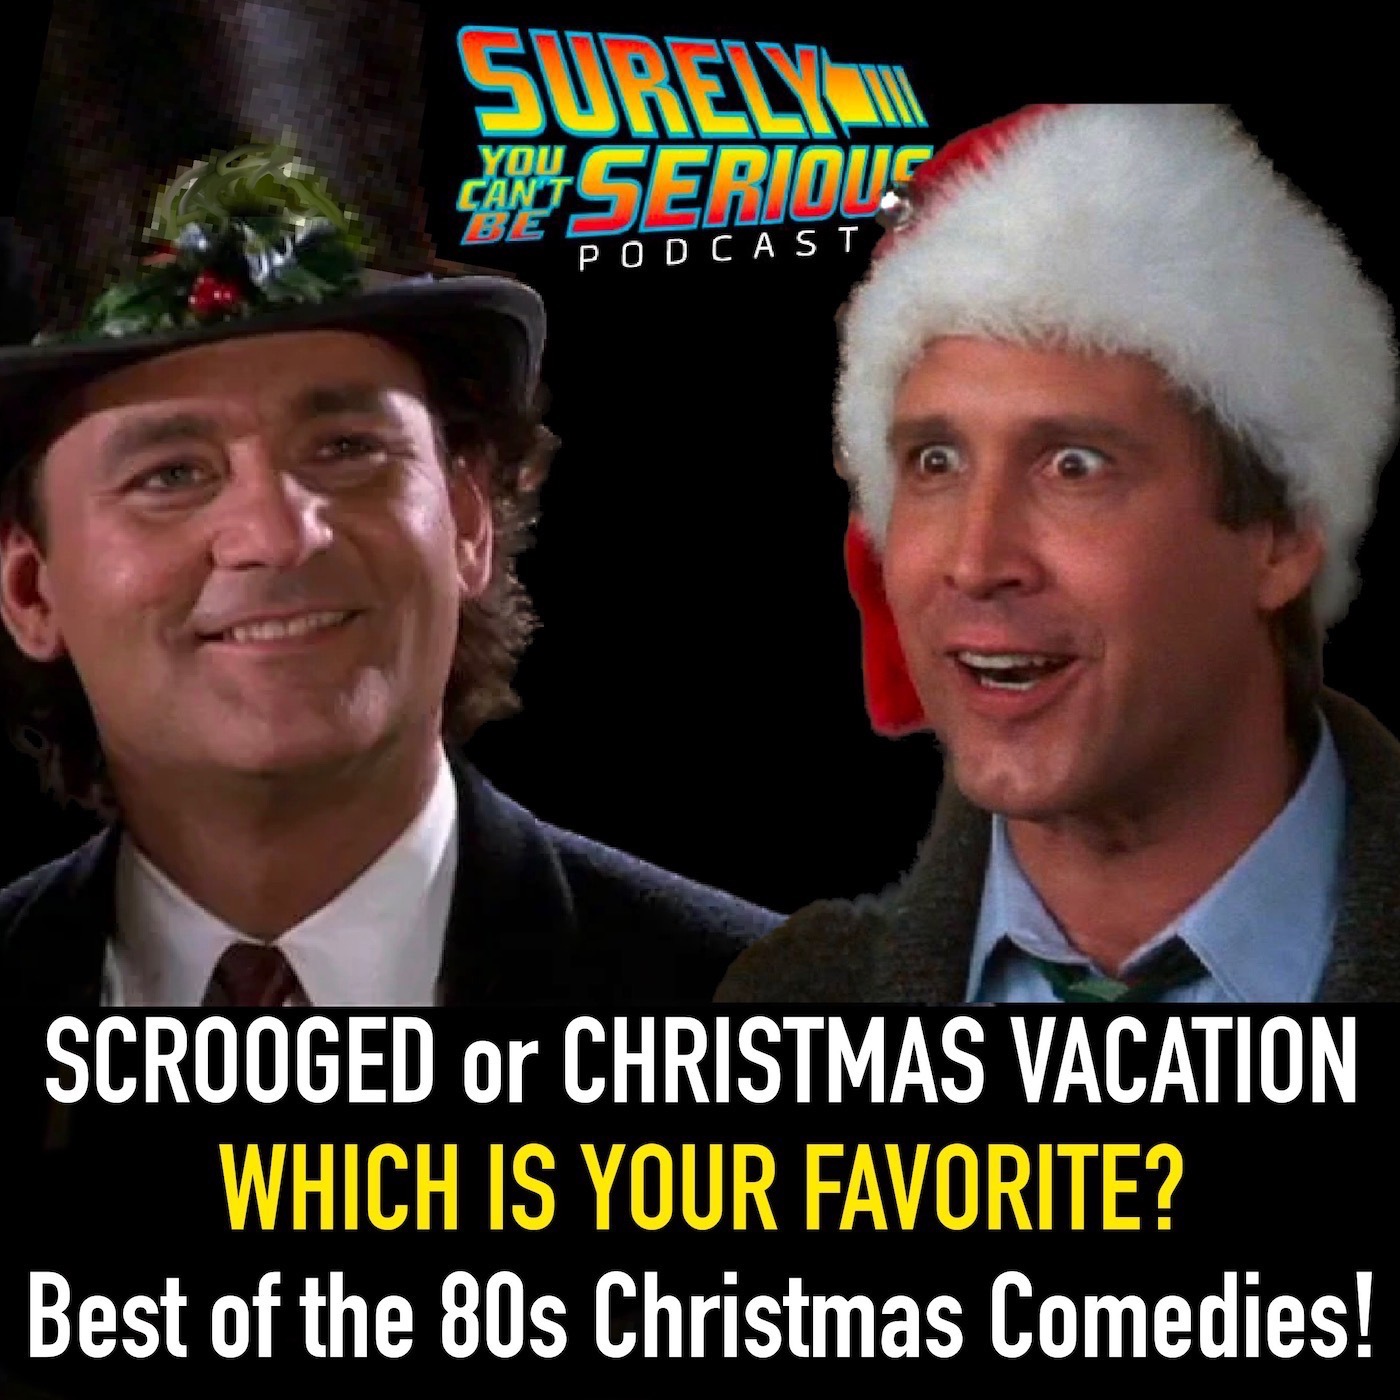 Scrooged (1988) vs. Christmas Vacation (1989): Part 2